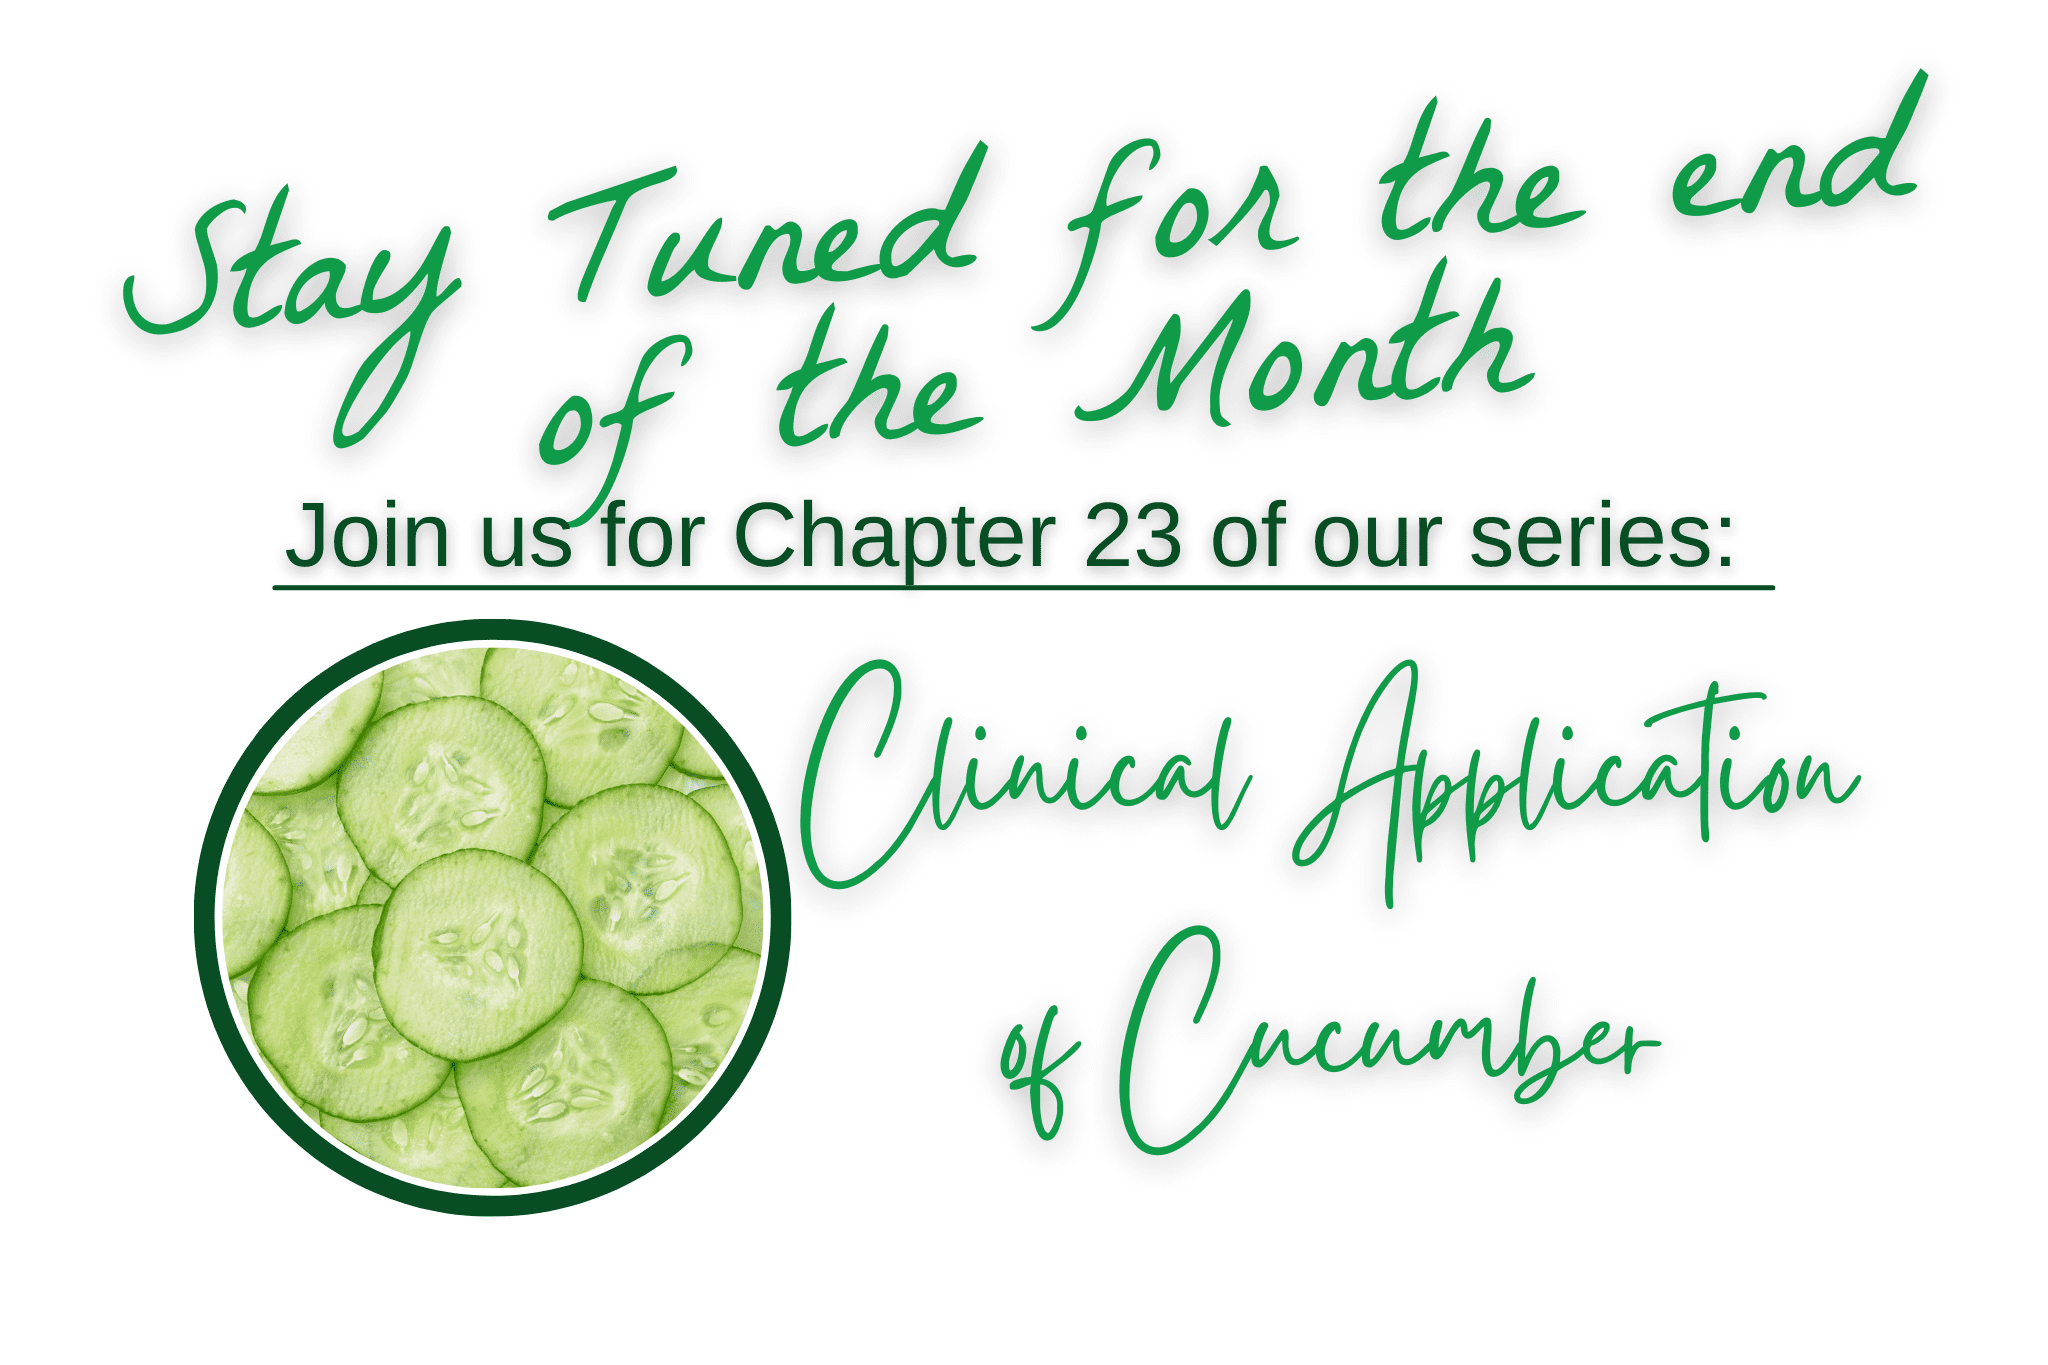 Stay Tuned for Clinical Application of Cucumber